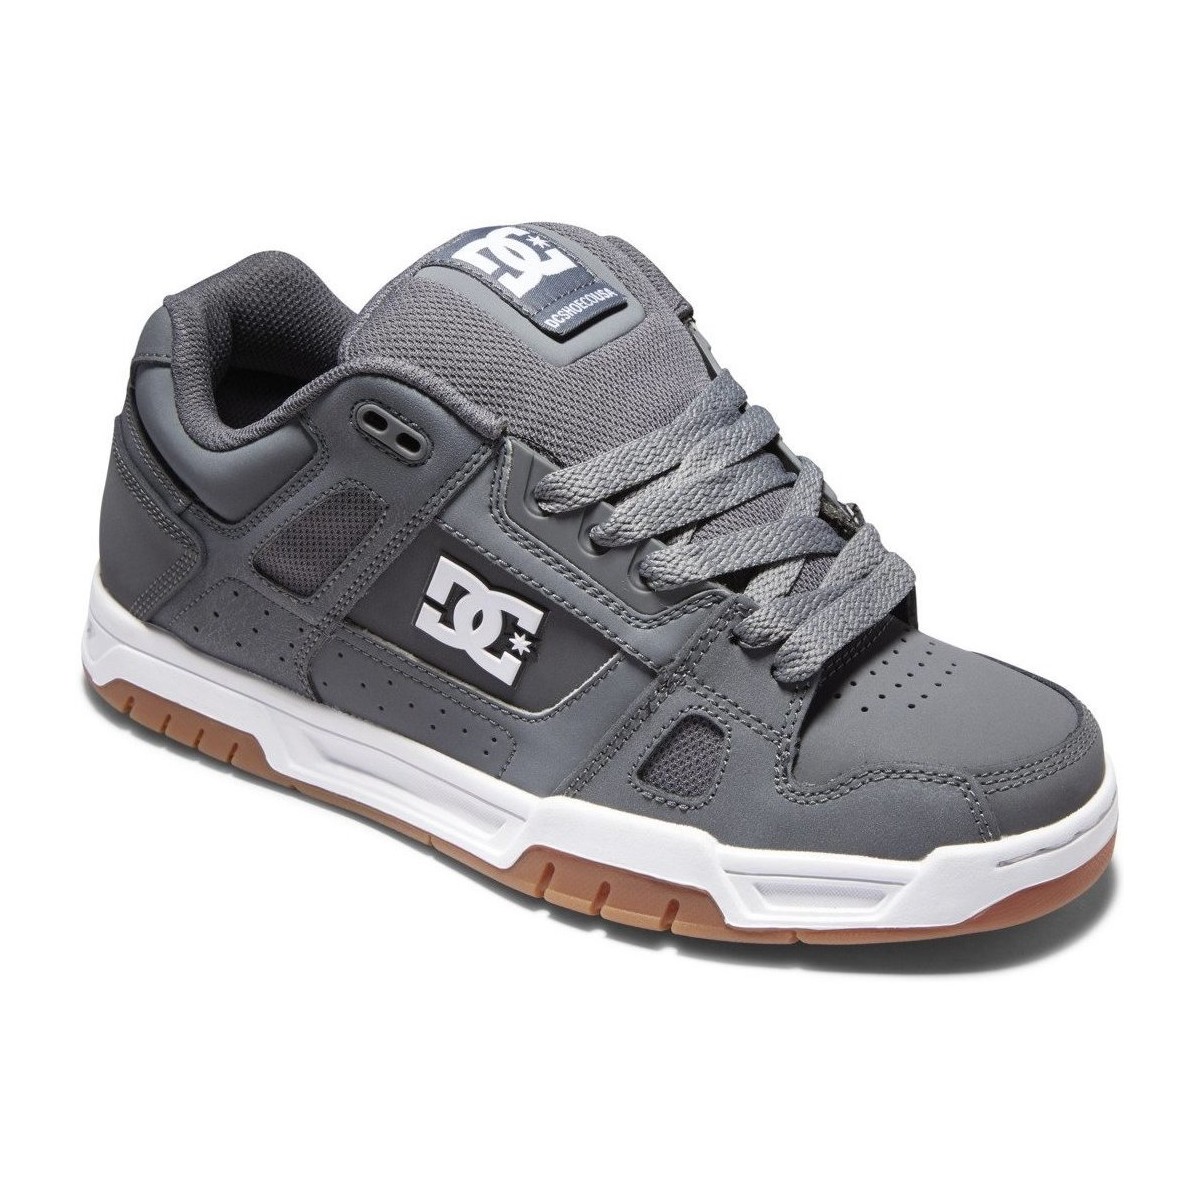 DC Shoes Gris Stag IdG88kAa